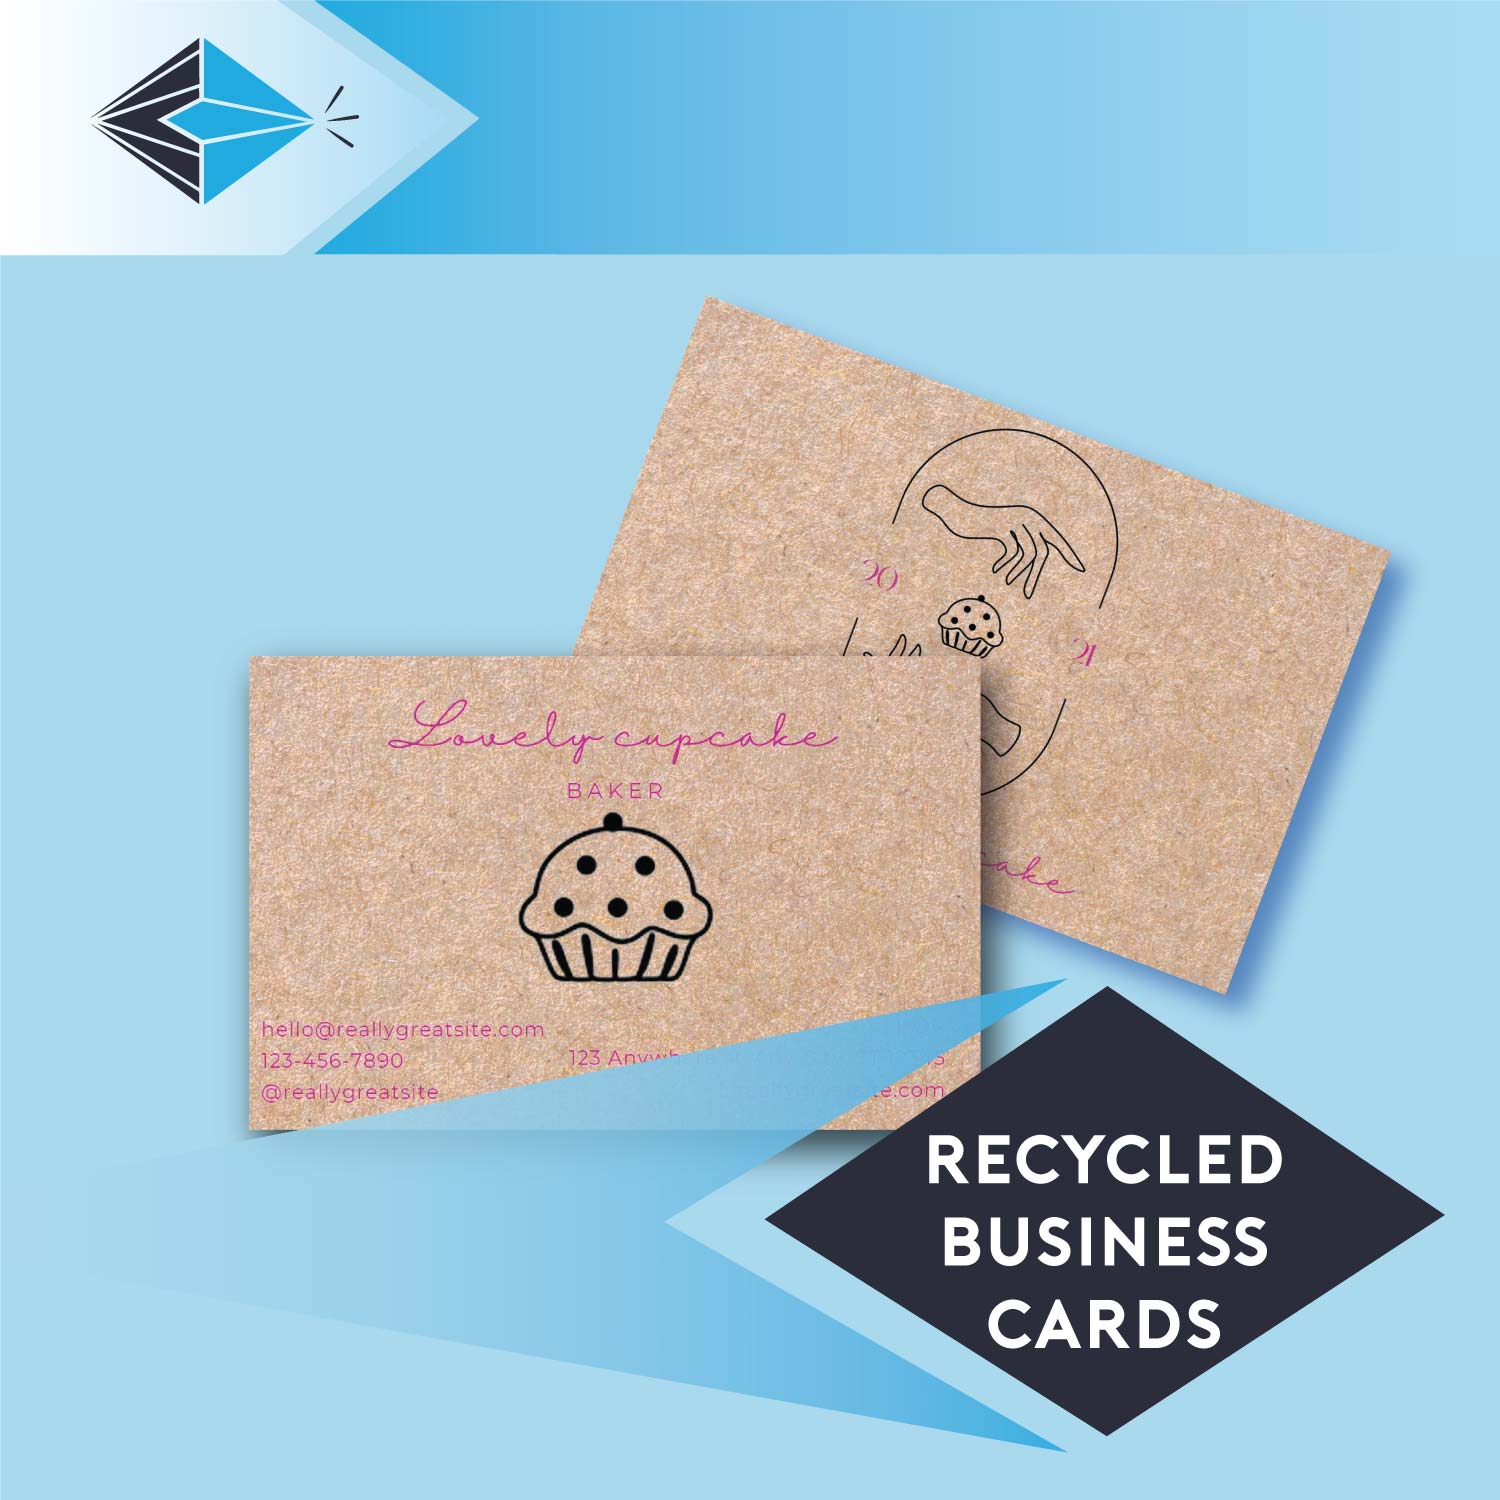 Recycled business cards eco friendly Manchester